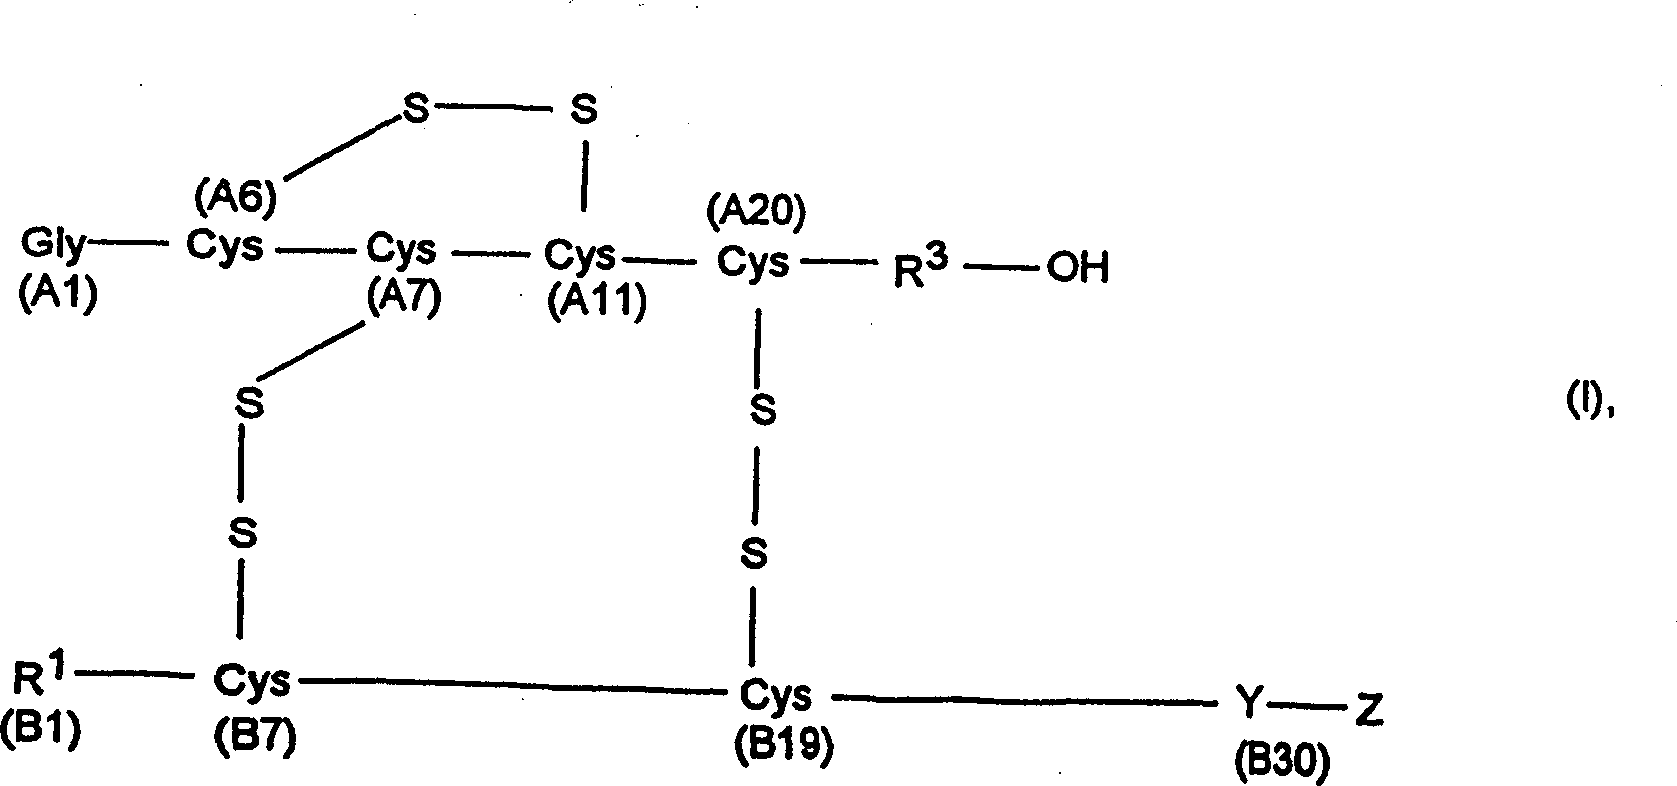 Process for obtaining insulin and insulin derivatives having correctly bonded crystine bridges